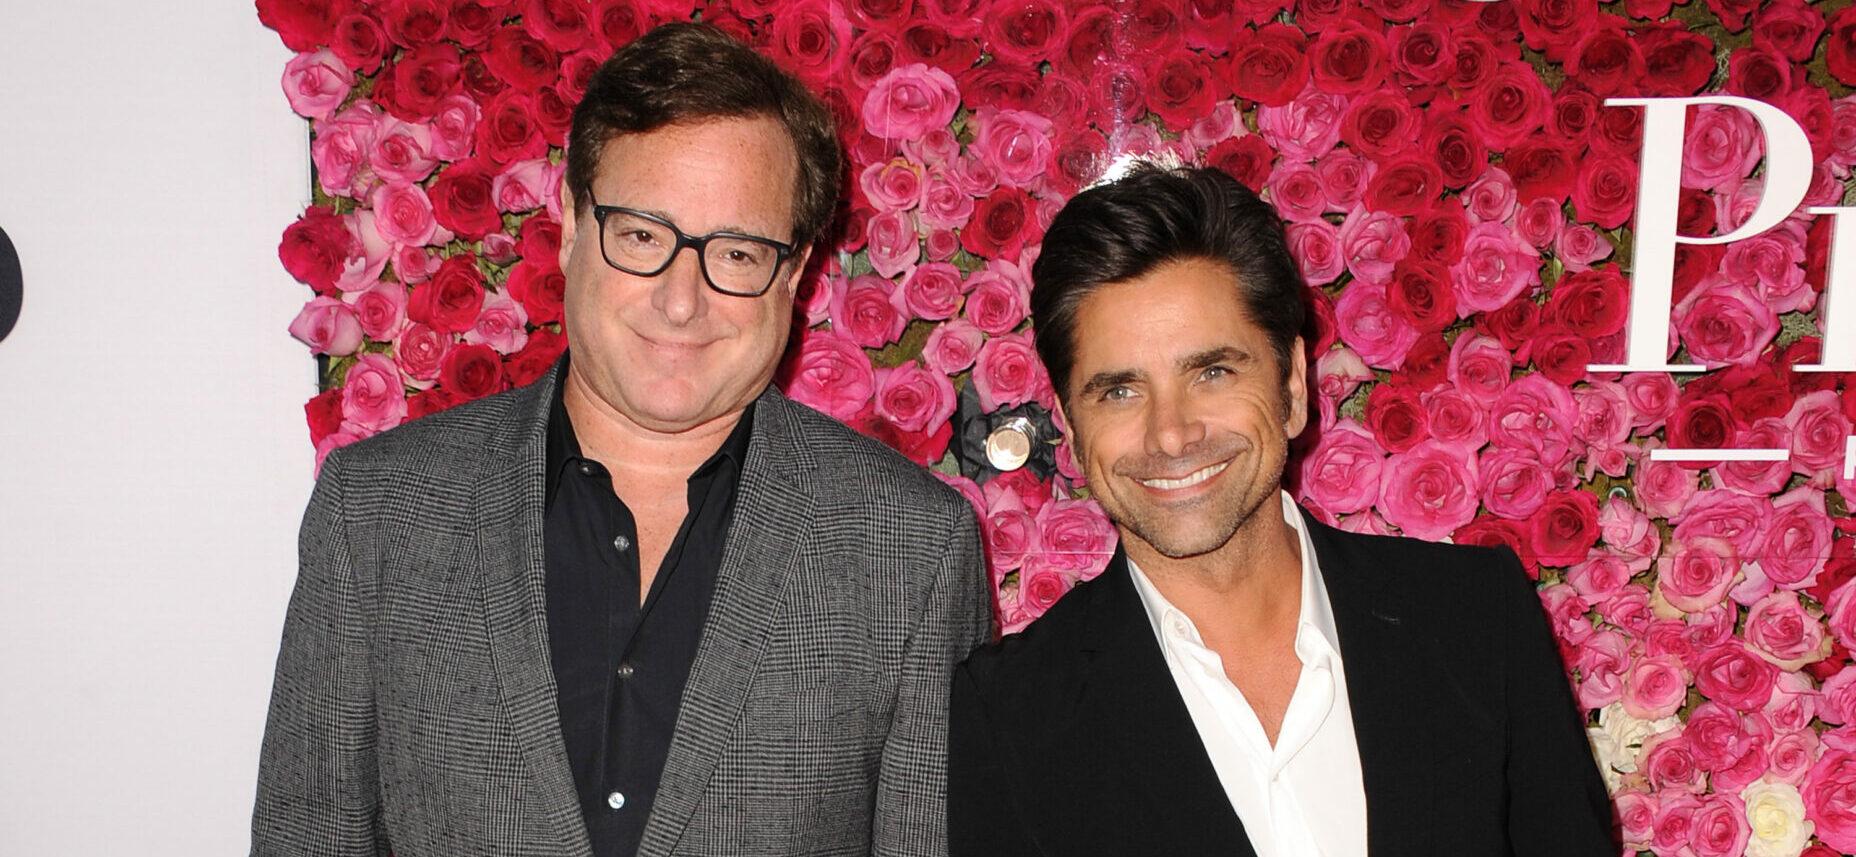 John Stamos Says He’s ‘Not Ready To Accept’ Bob Saget’s Death